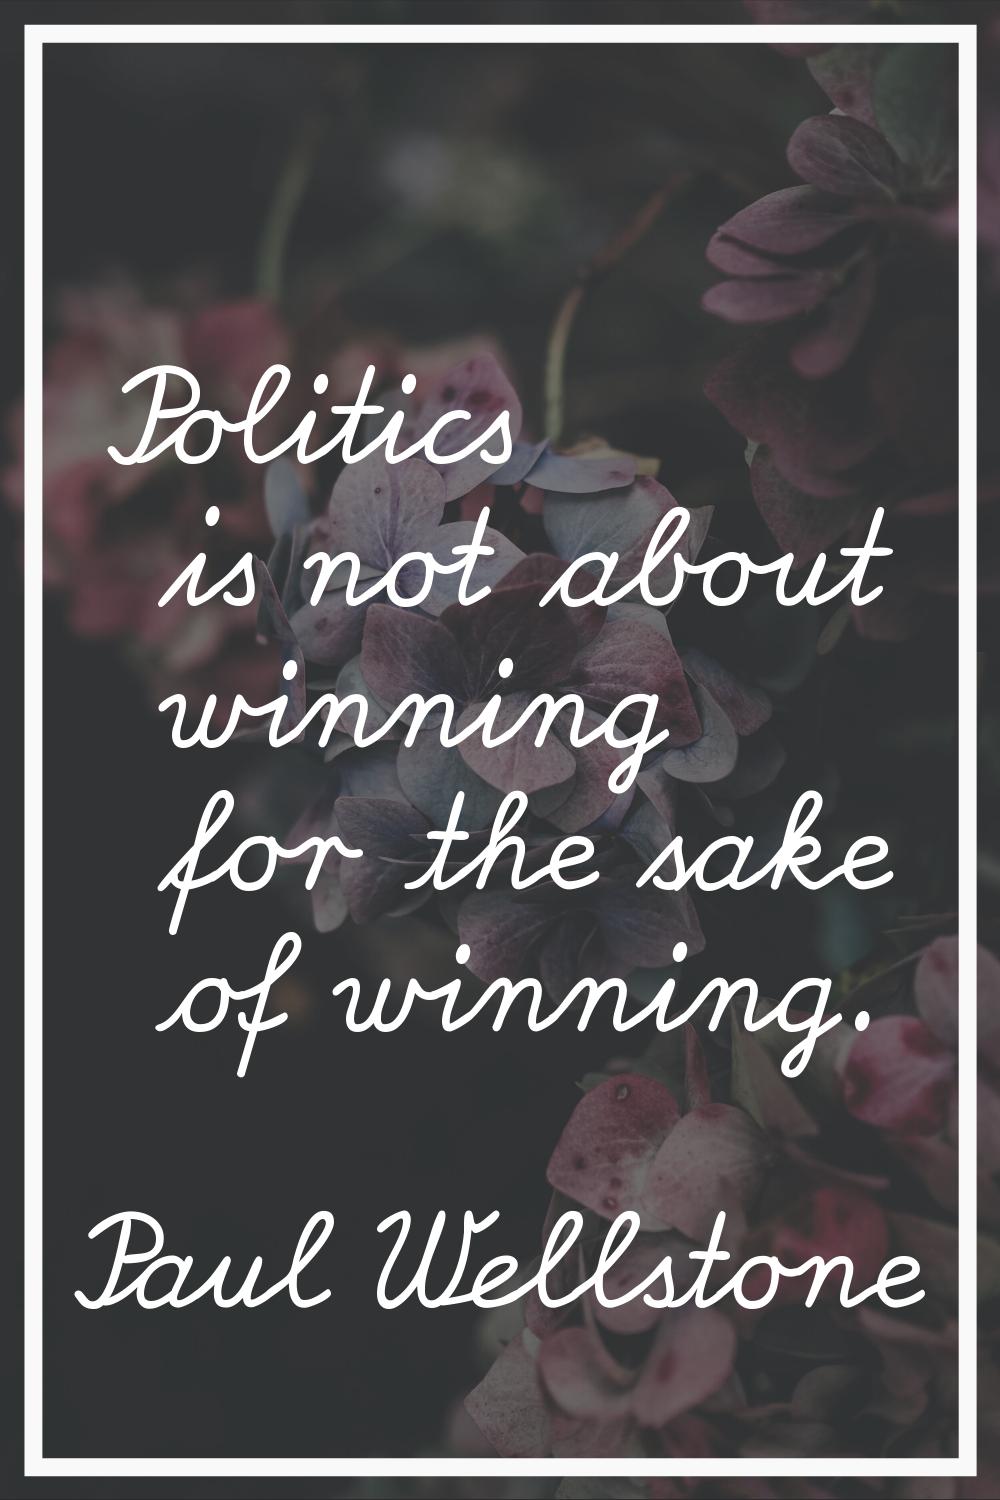 Politics is not about winning for the sake of winning.